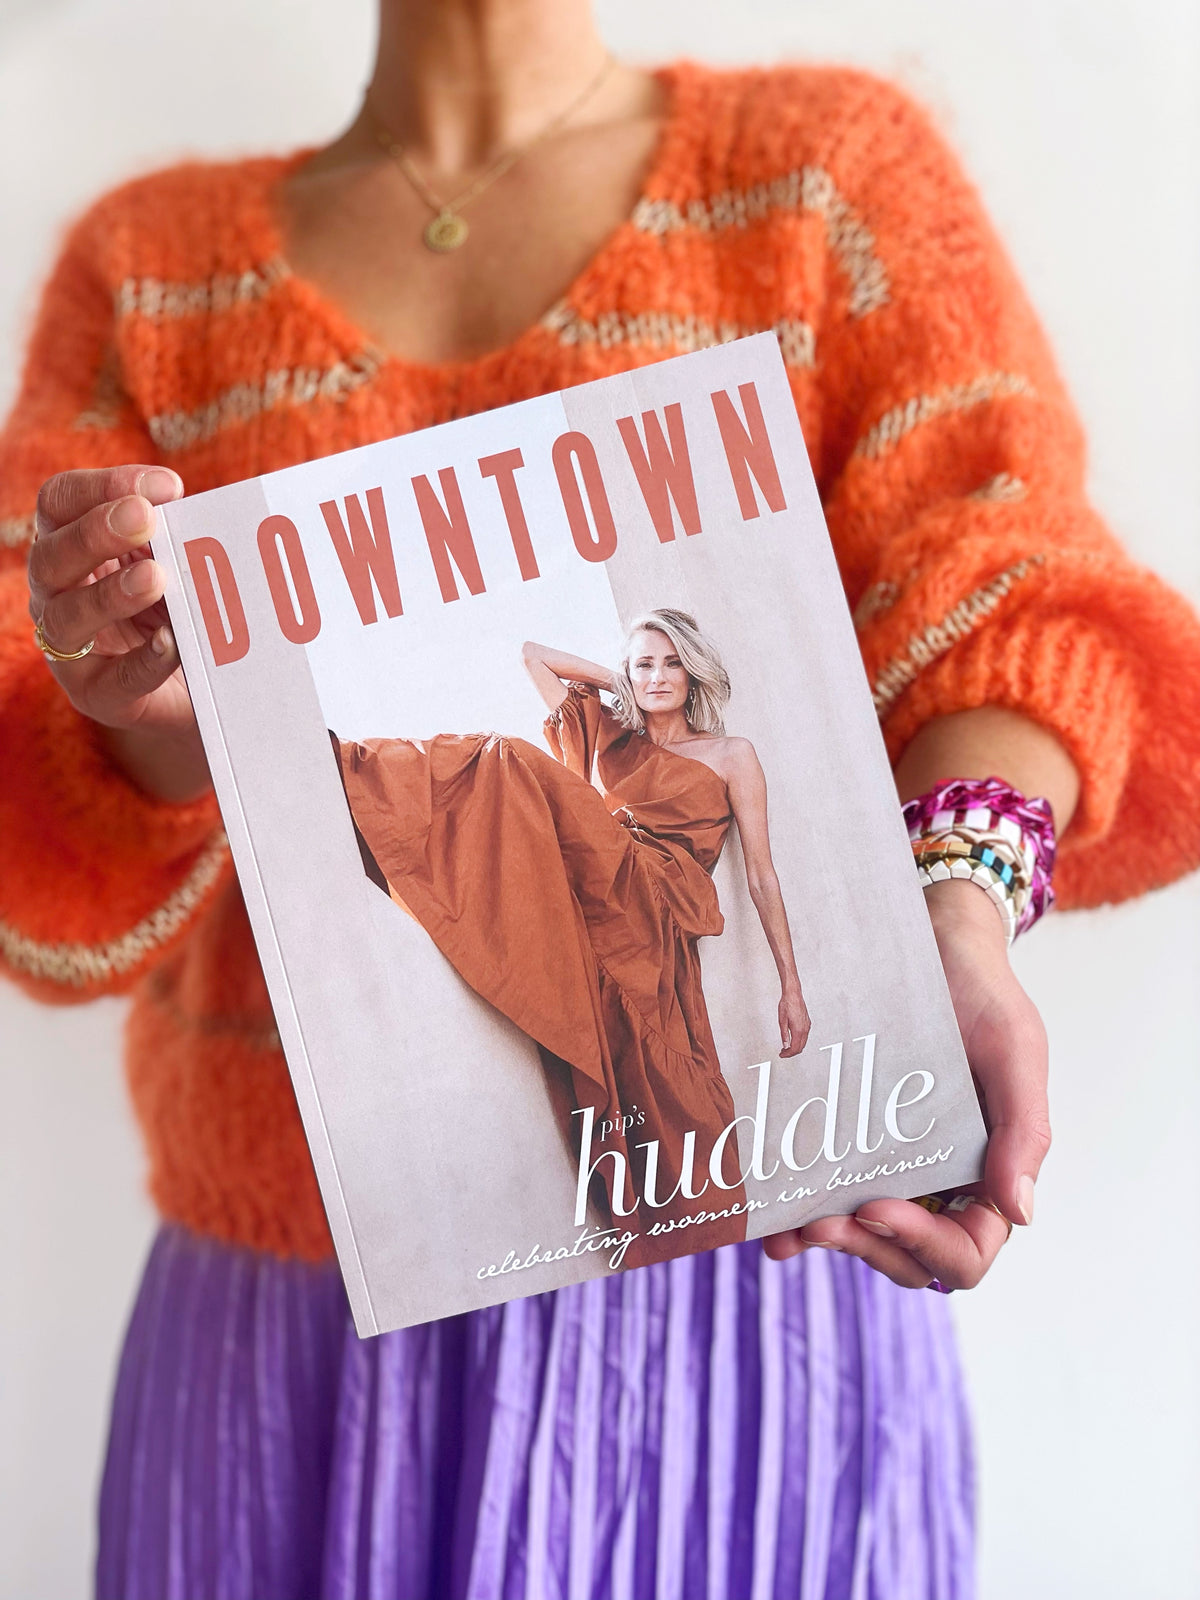 We carry a large selection of high-quality Items with affordable prices.  Downtown Magazine - Collectors Edition Downtown